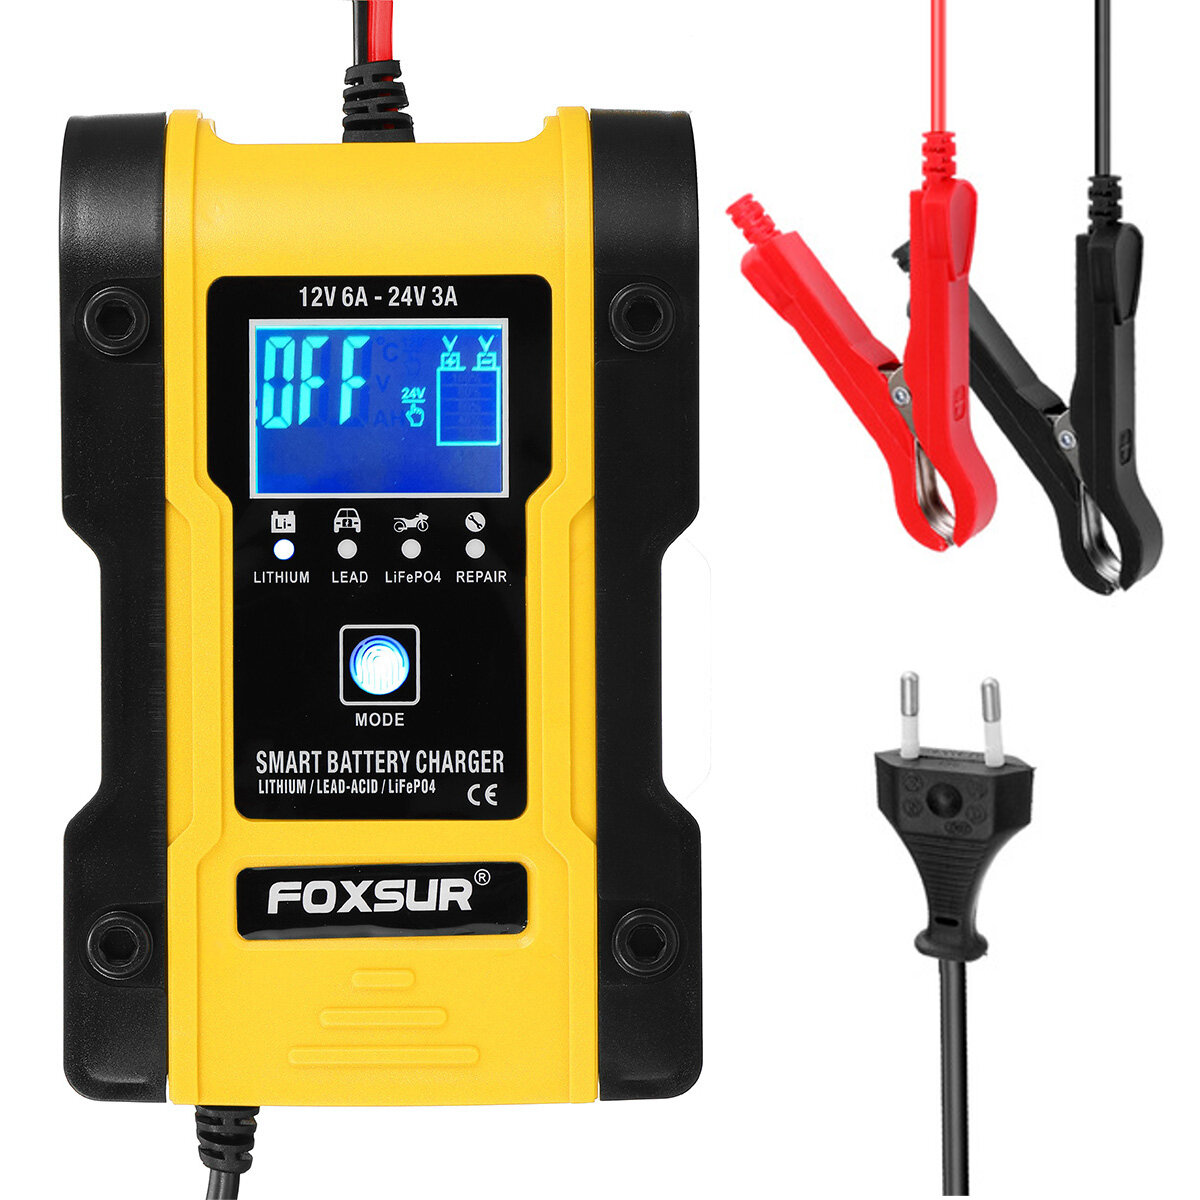 FOXSUR 7-Stages 12V 6A 24V 3A Battery Charger Touch Screen LCD Display Pulse Repair Automatic For Ca